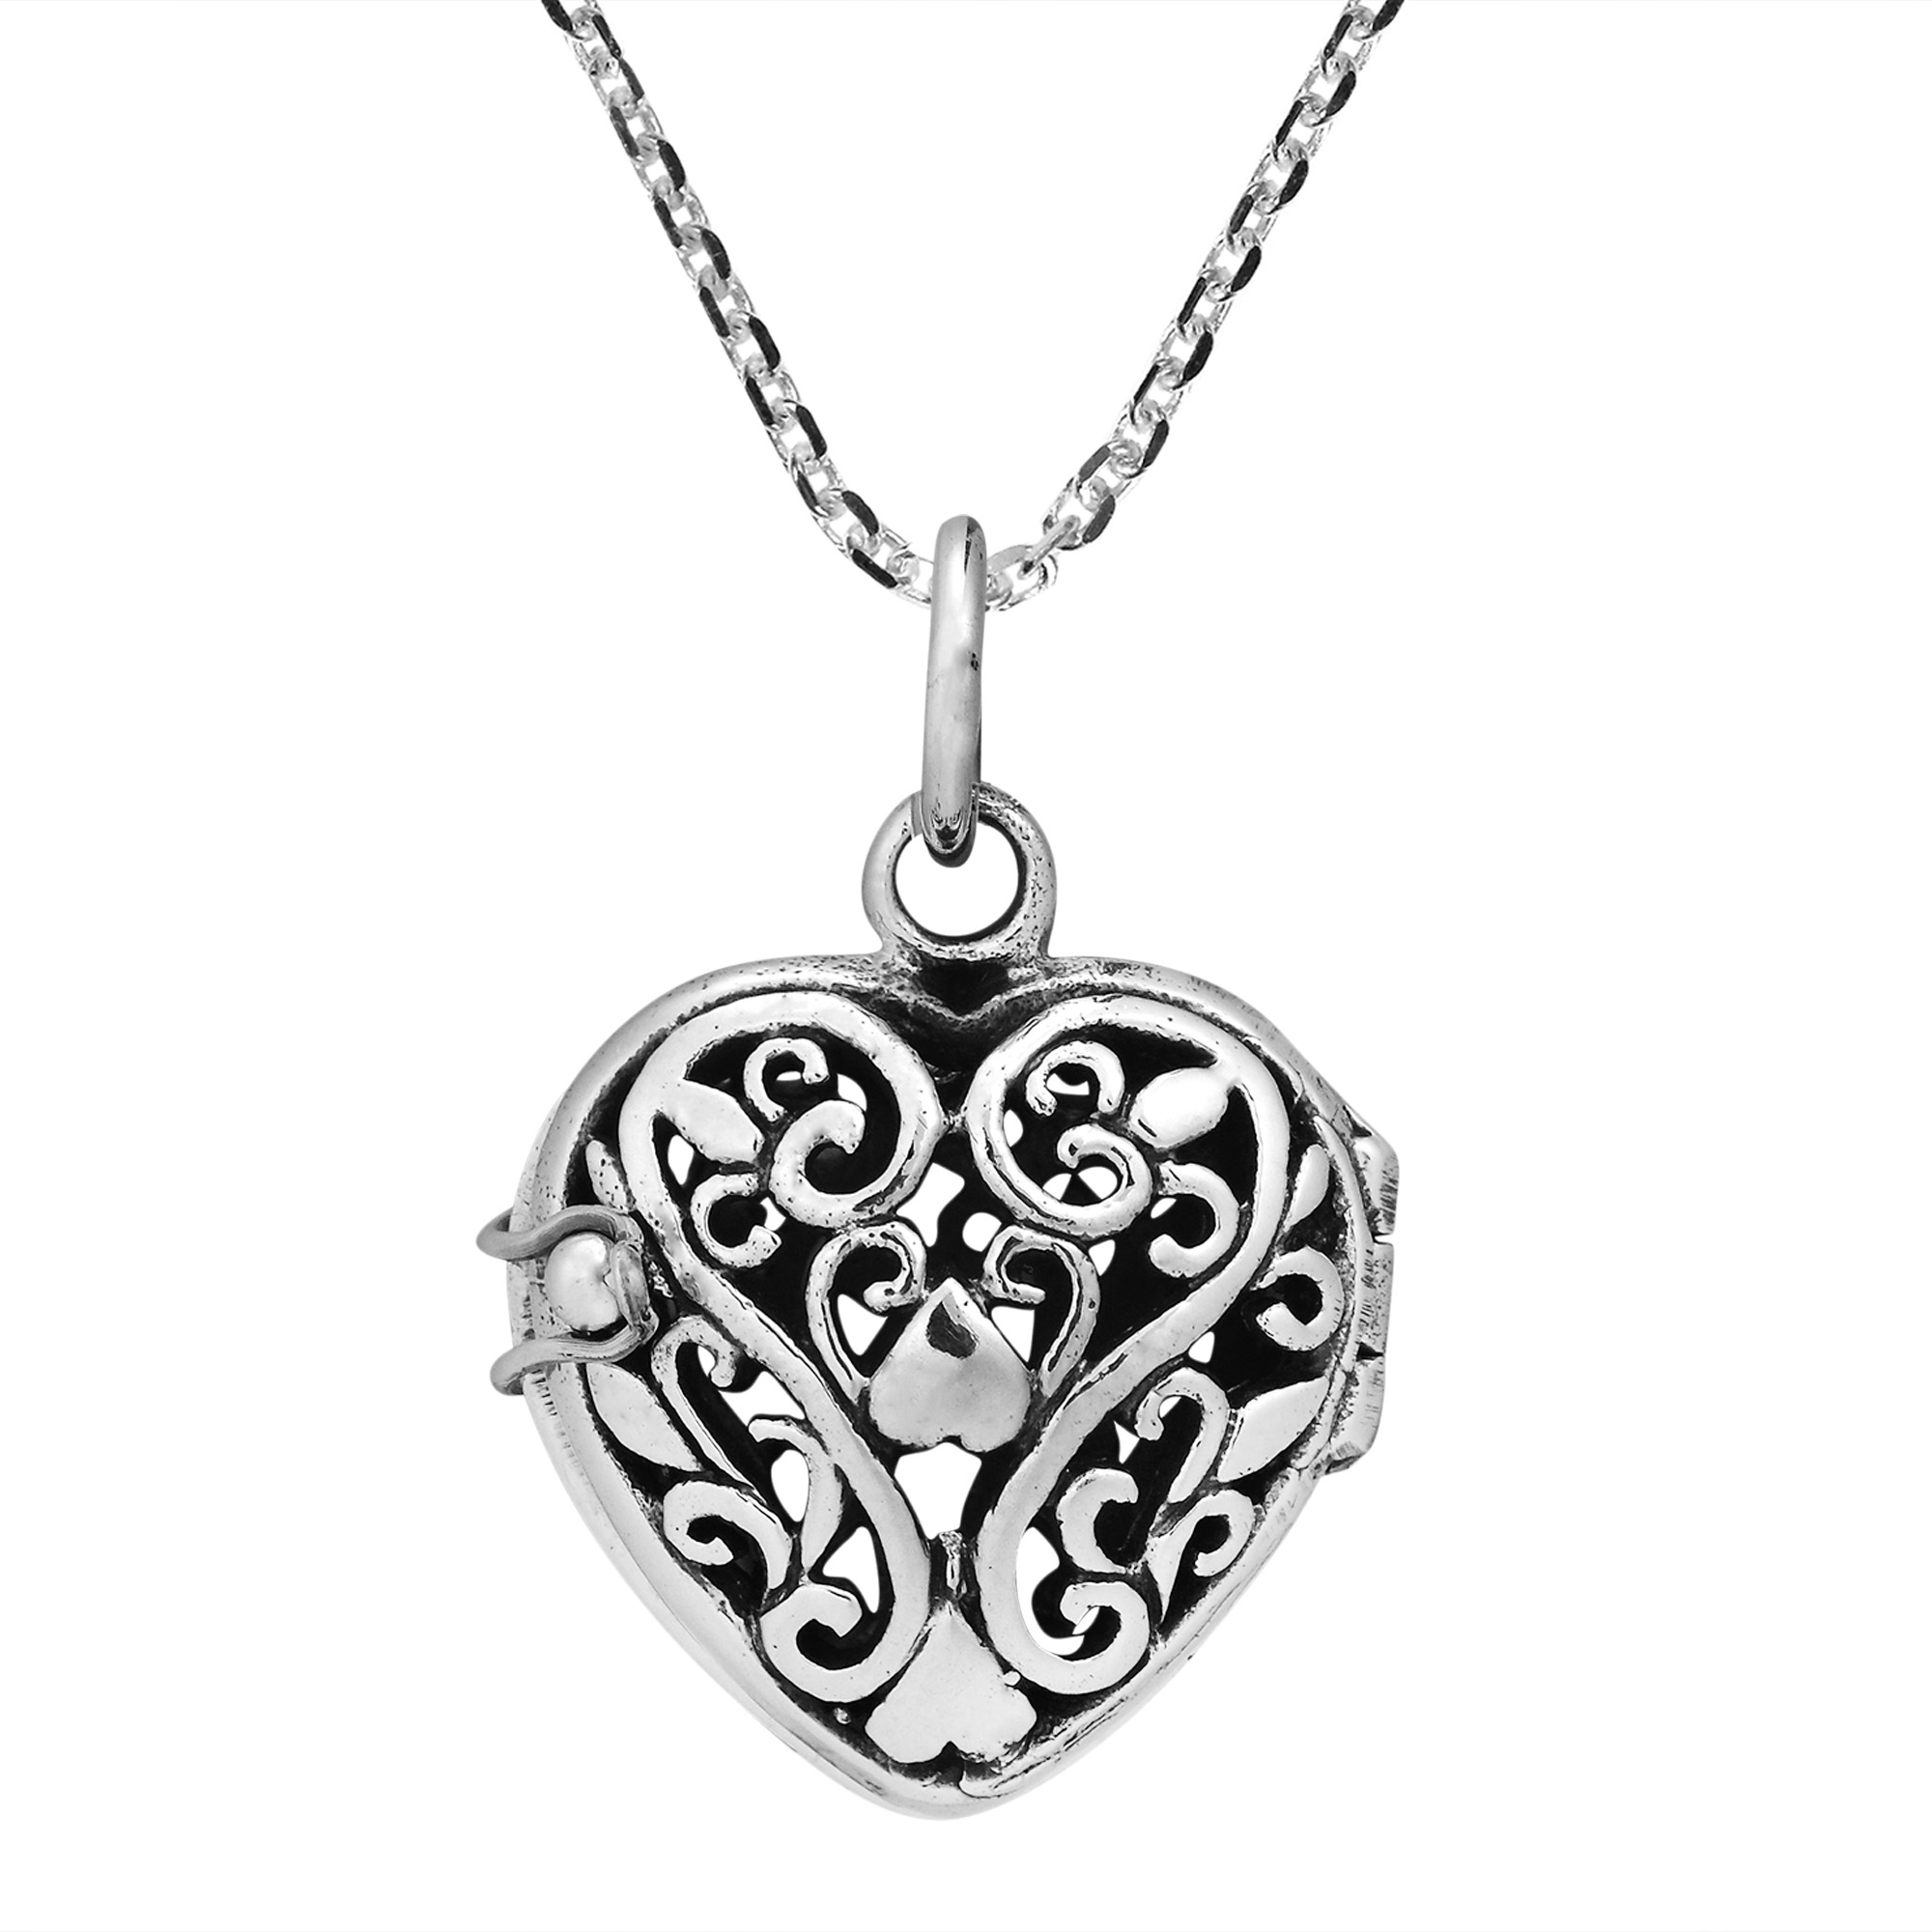 Classic Vintage Filigree Etched Heart Locket Sterling Silver Necklace